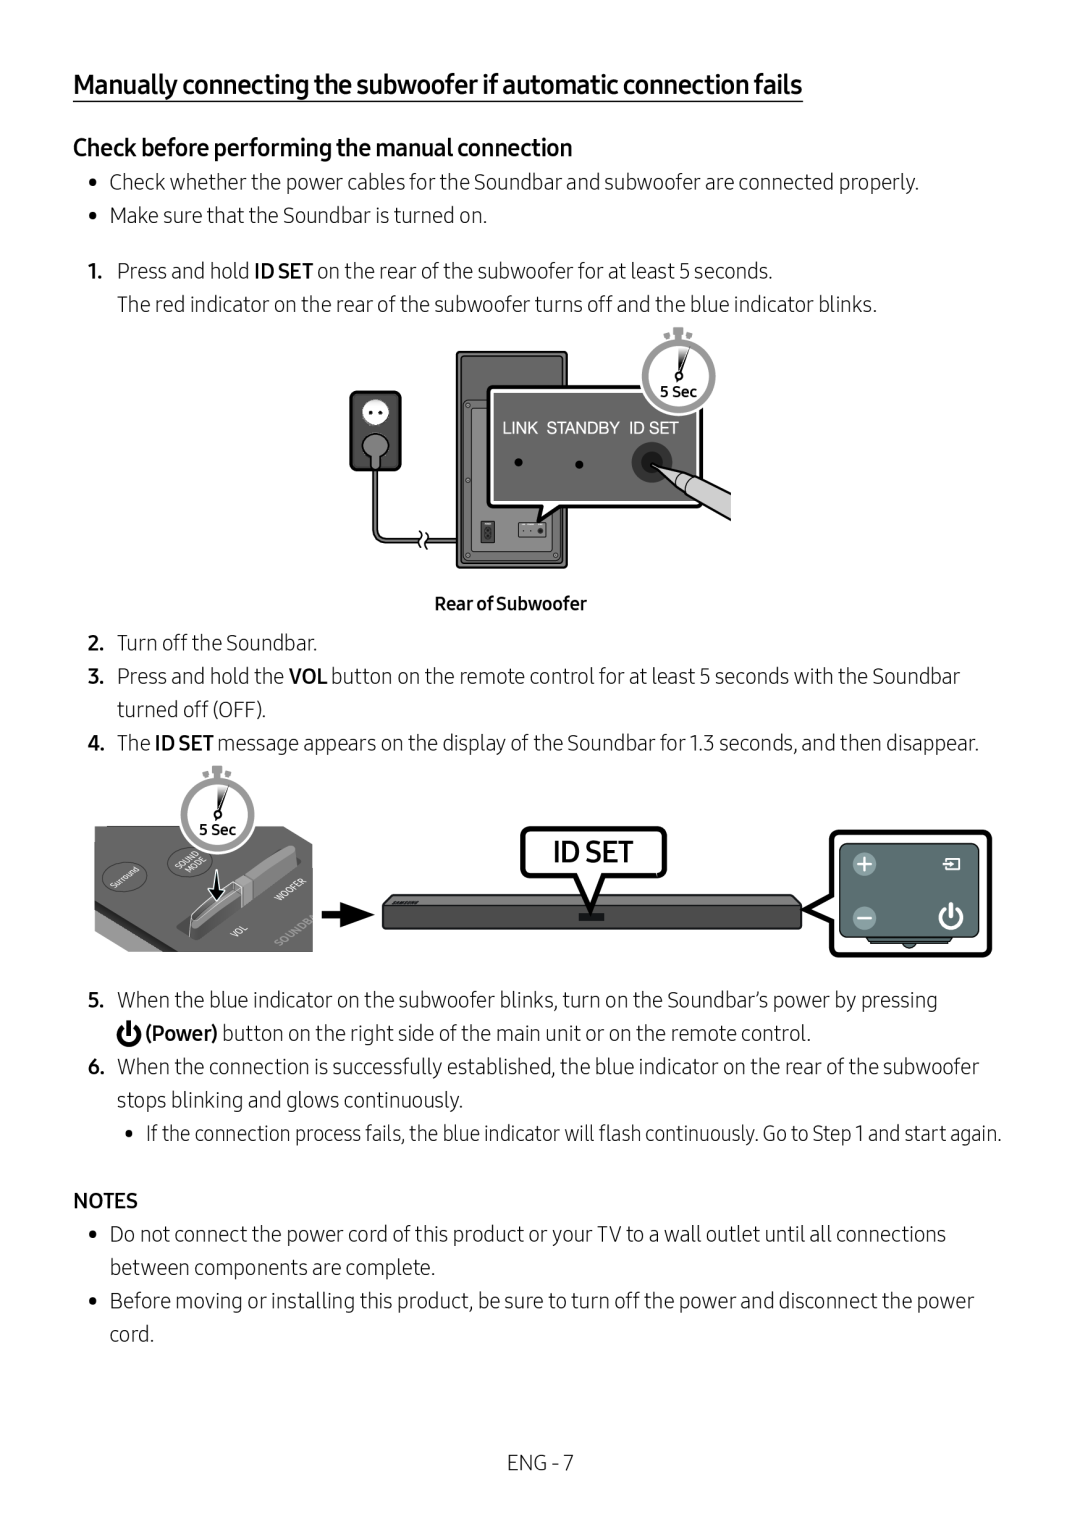 Samsung HW-M460/XE, HW-M450/EN, HW-M450/ZG manual Id Set, Manually connecting the subwoofer if automatic connection fails 